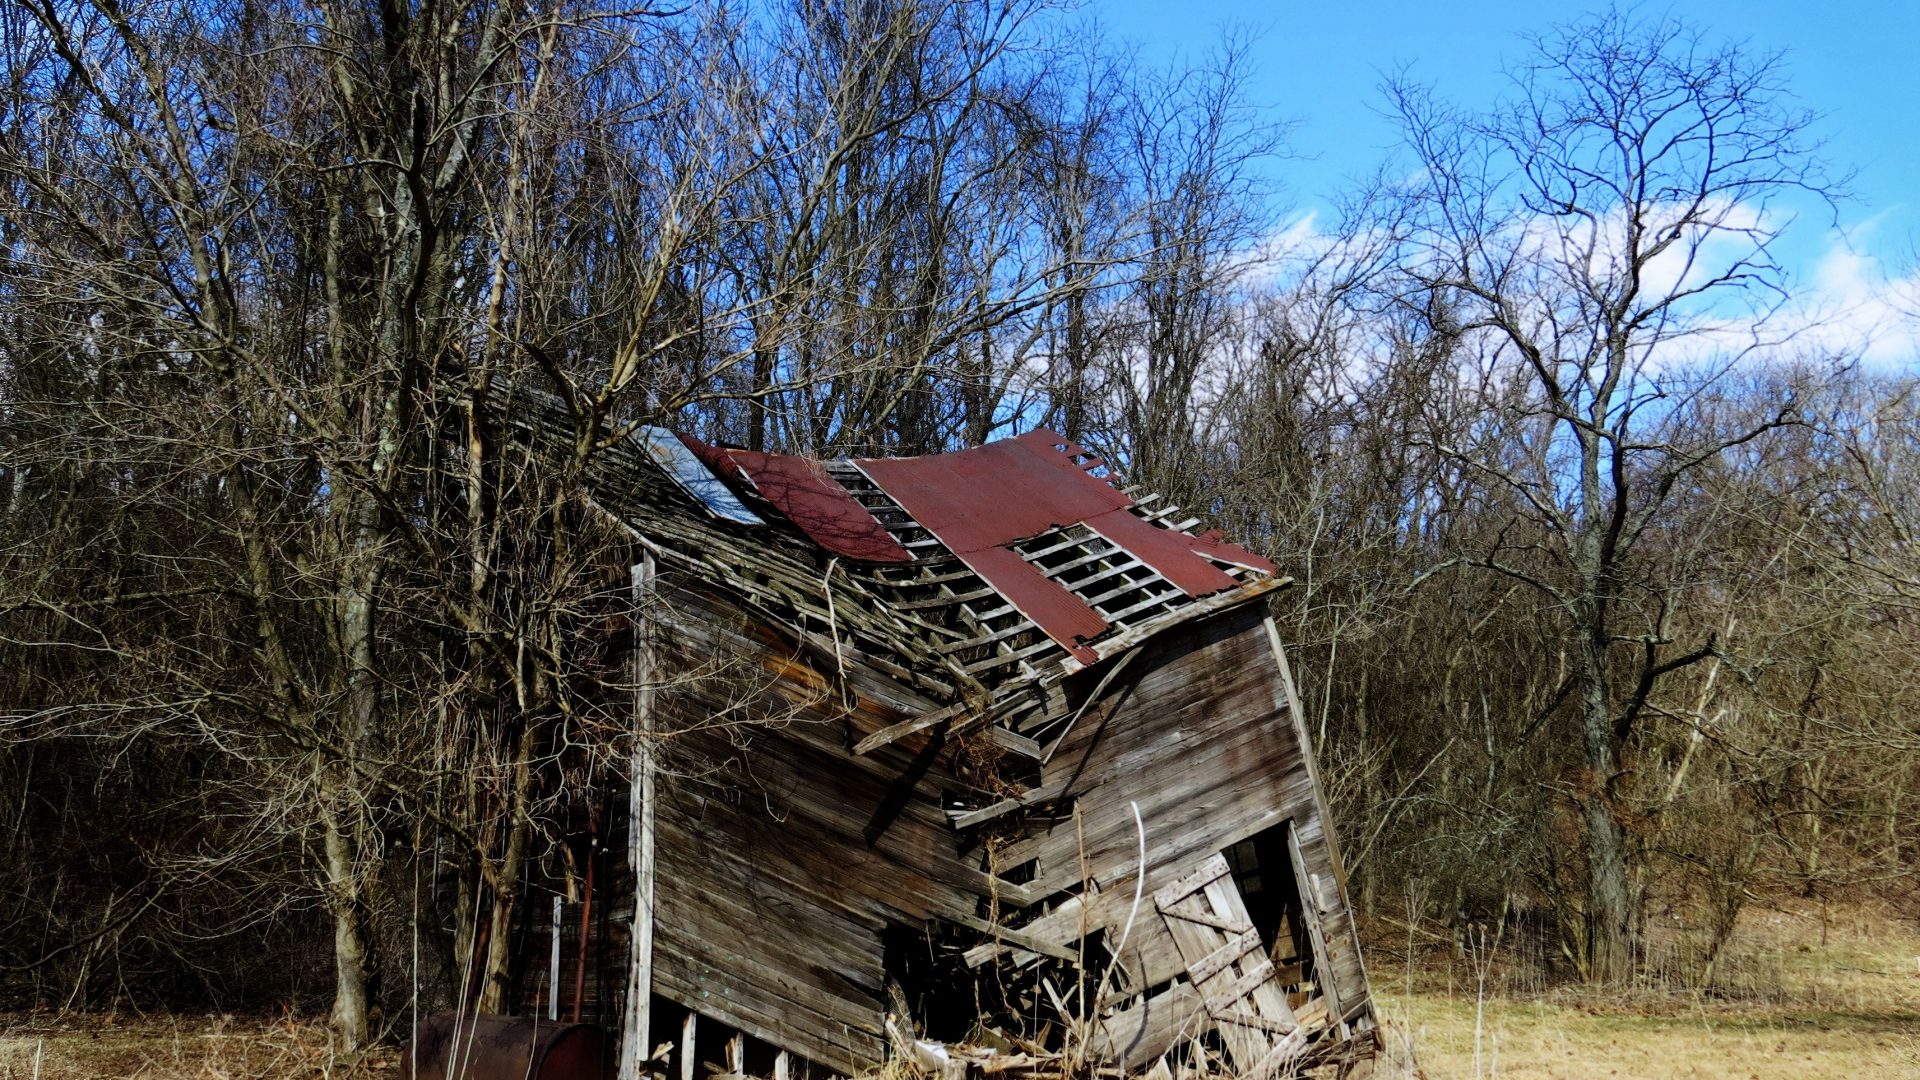 Farms: Shaggy Shack Shed Cracked Middle Wv Shelter Wooden Timber ...